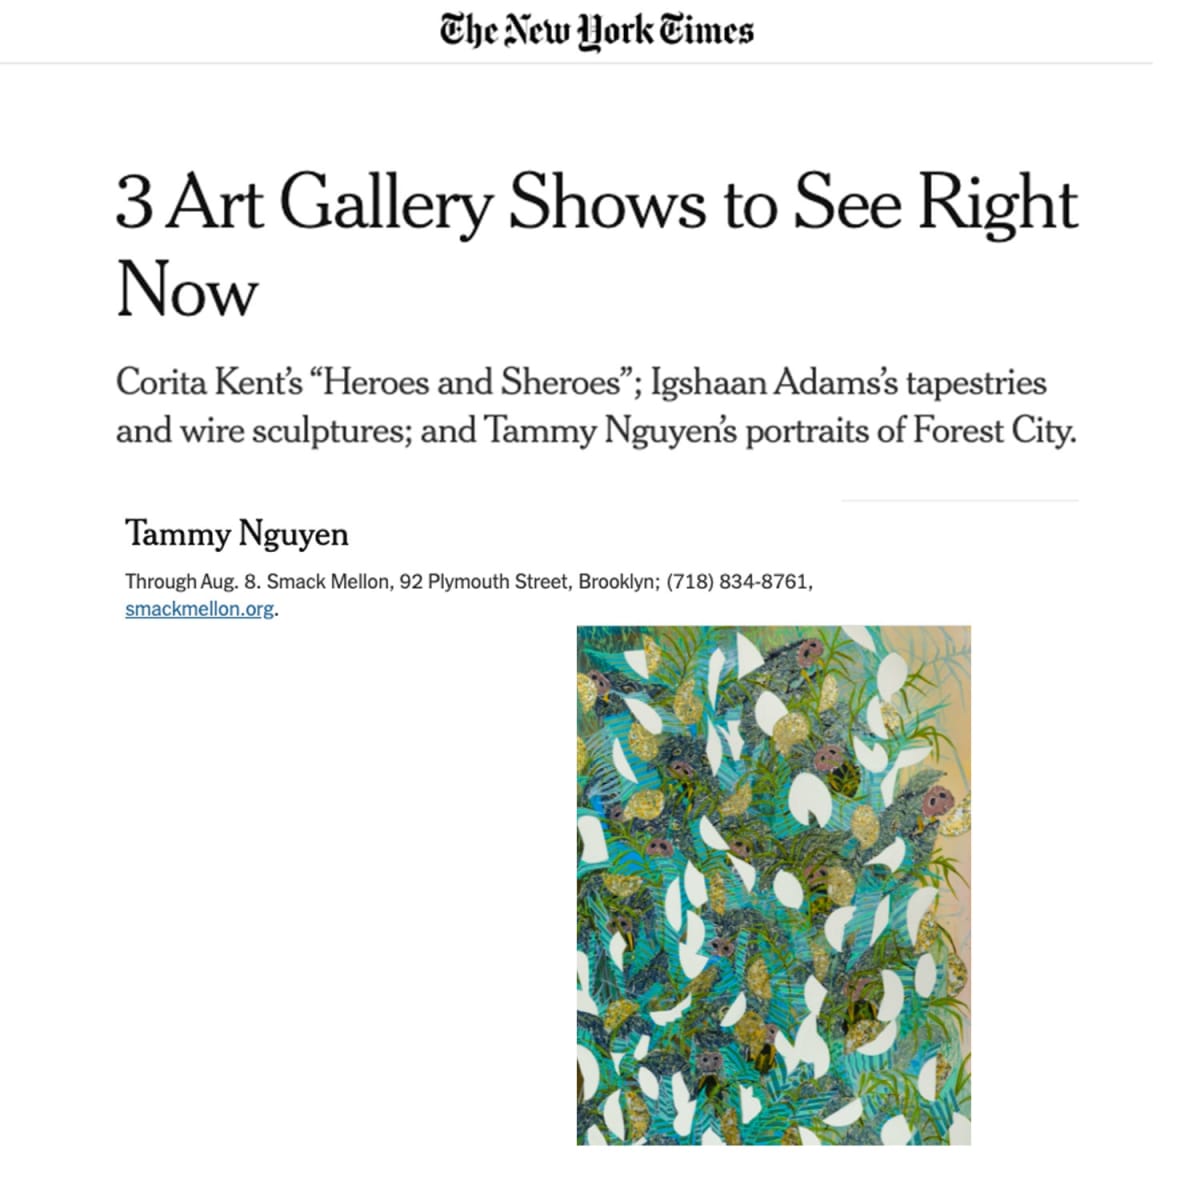 New York Art Galleries: What to See Right Now - The New York Times